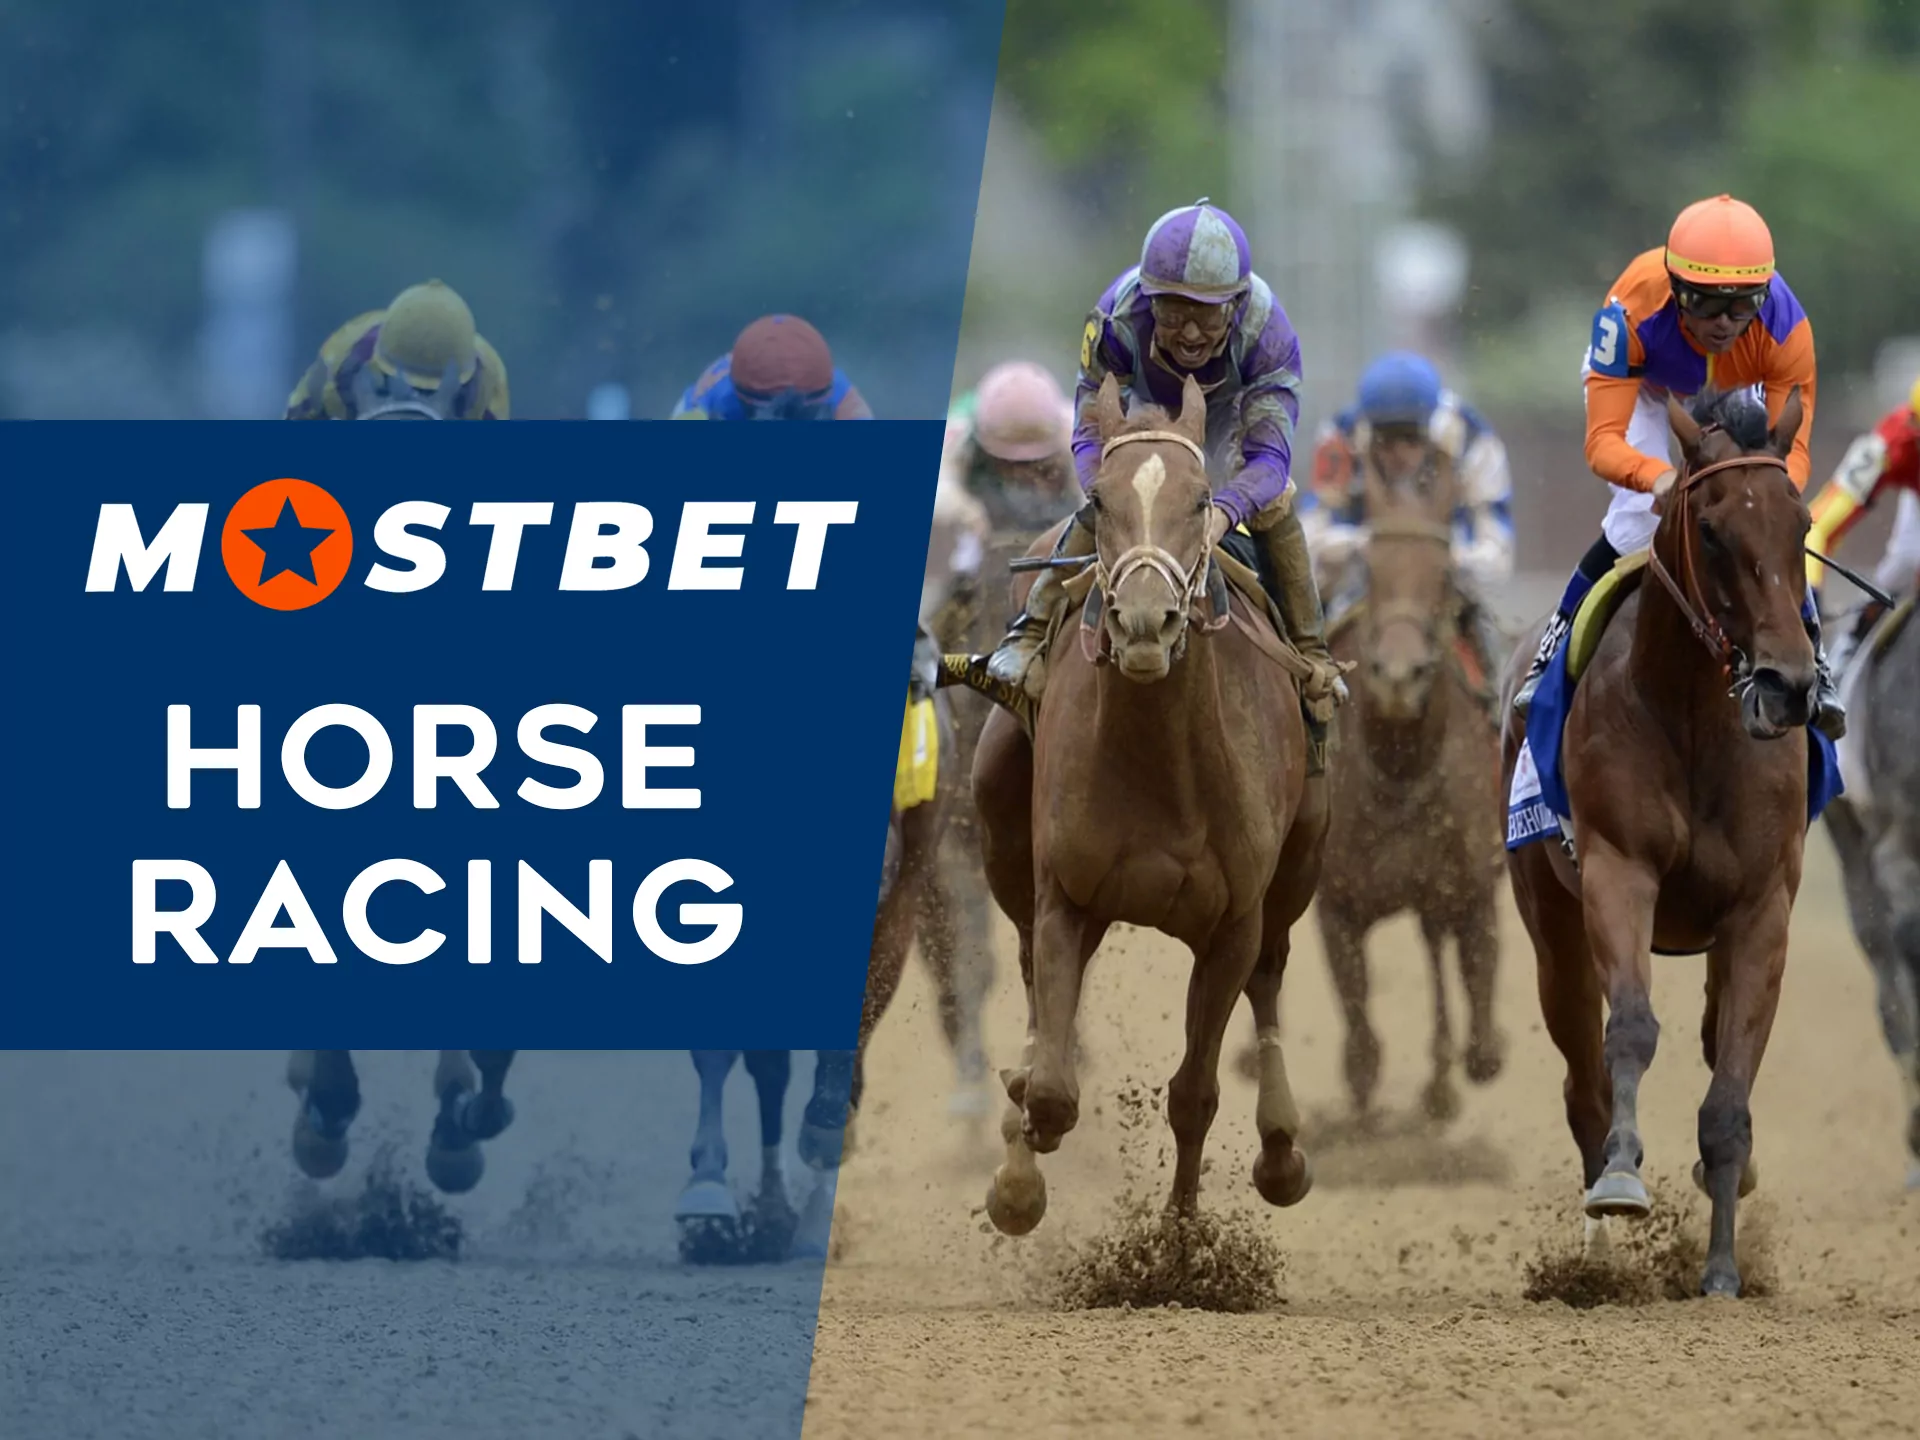 You can bet on main horse racing tournaments with Mostbet.